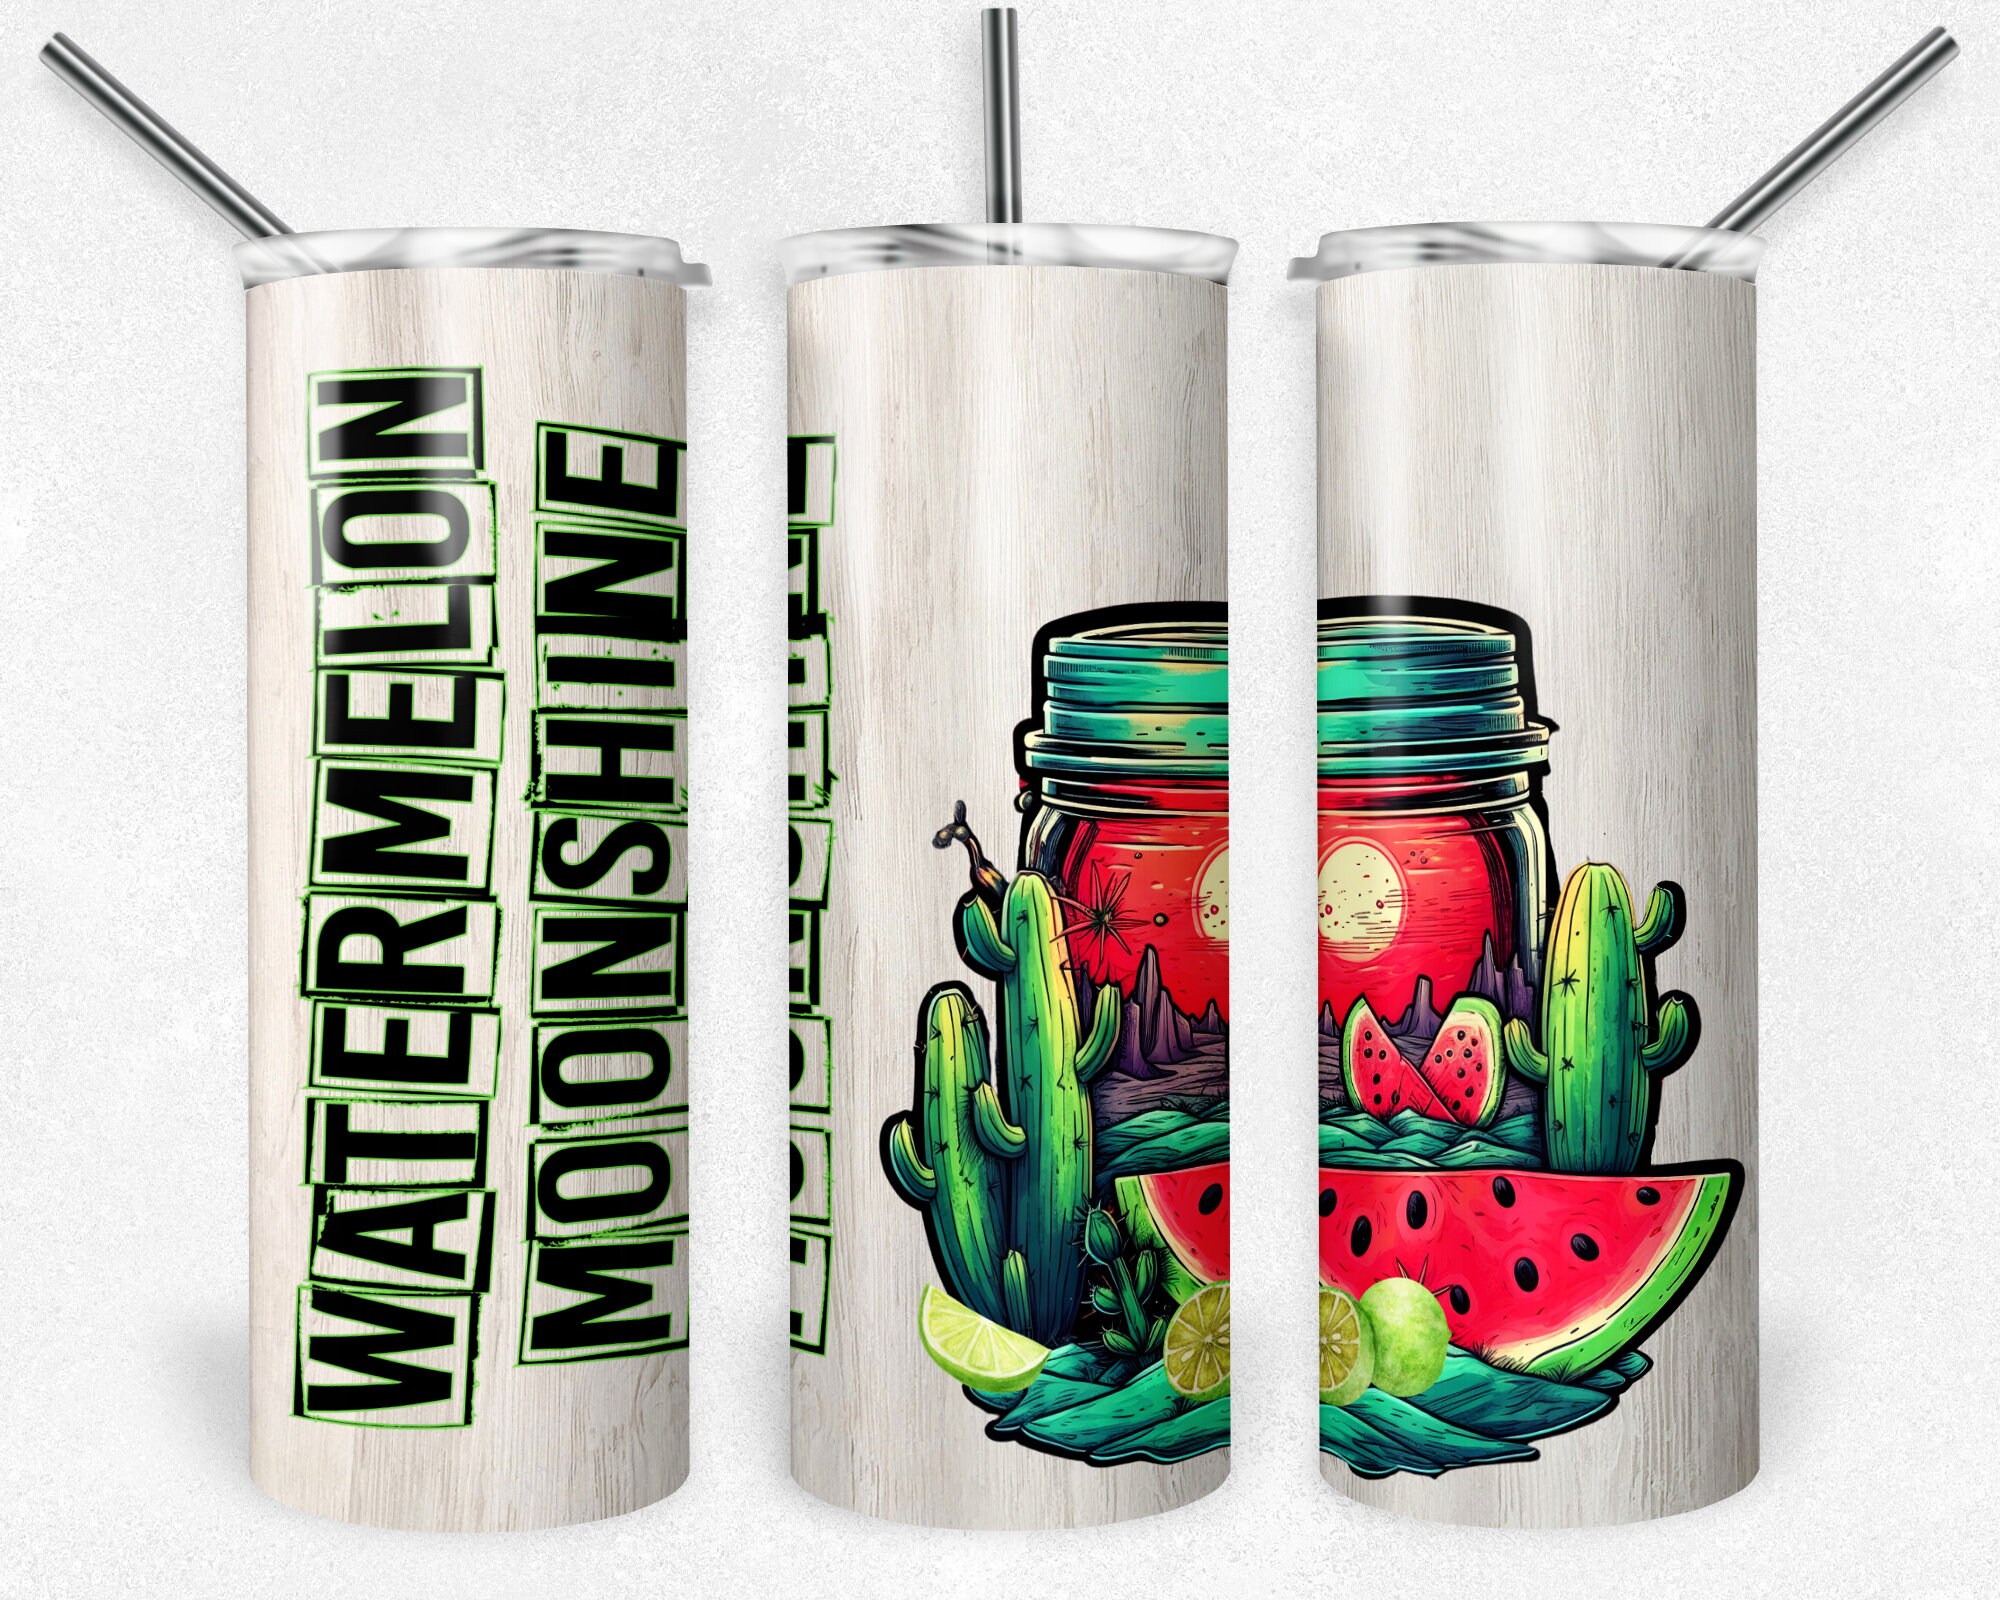 Big Size Tumbler Cups (Mint, Water Valley Watermelon logo) –